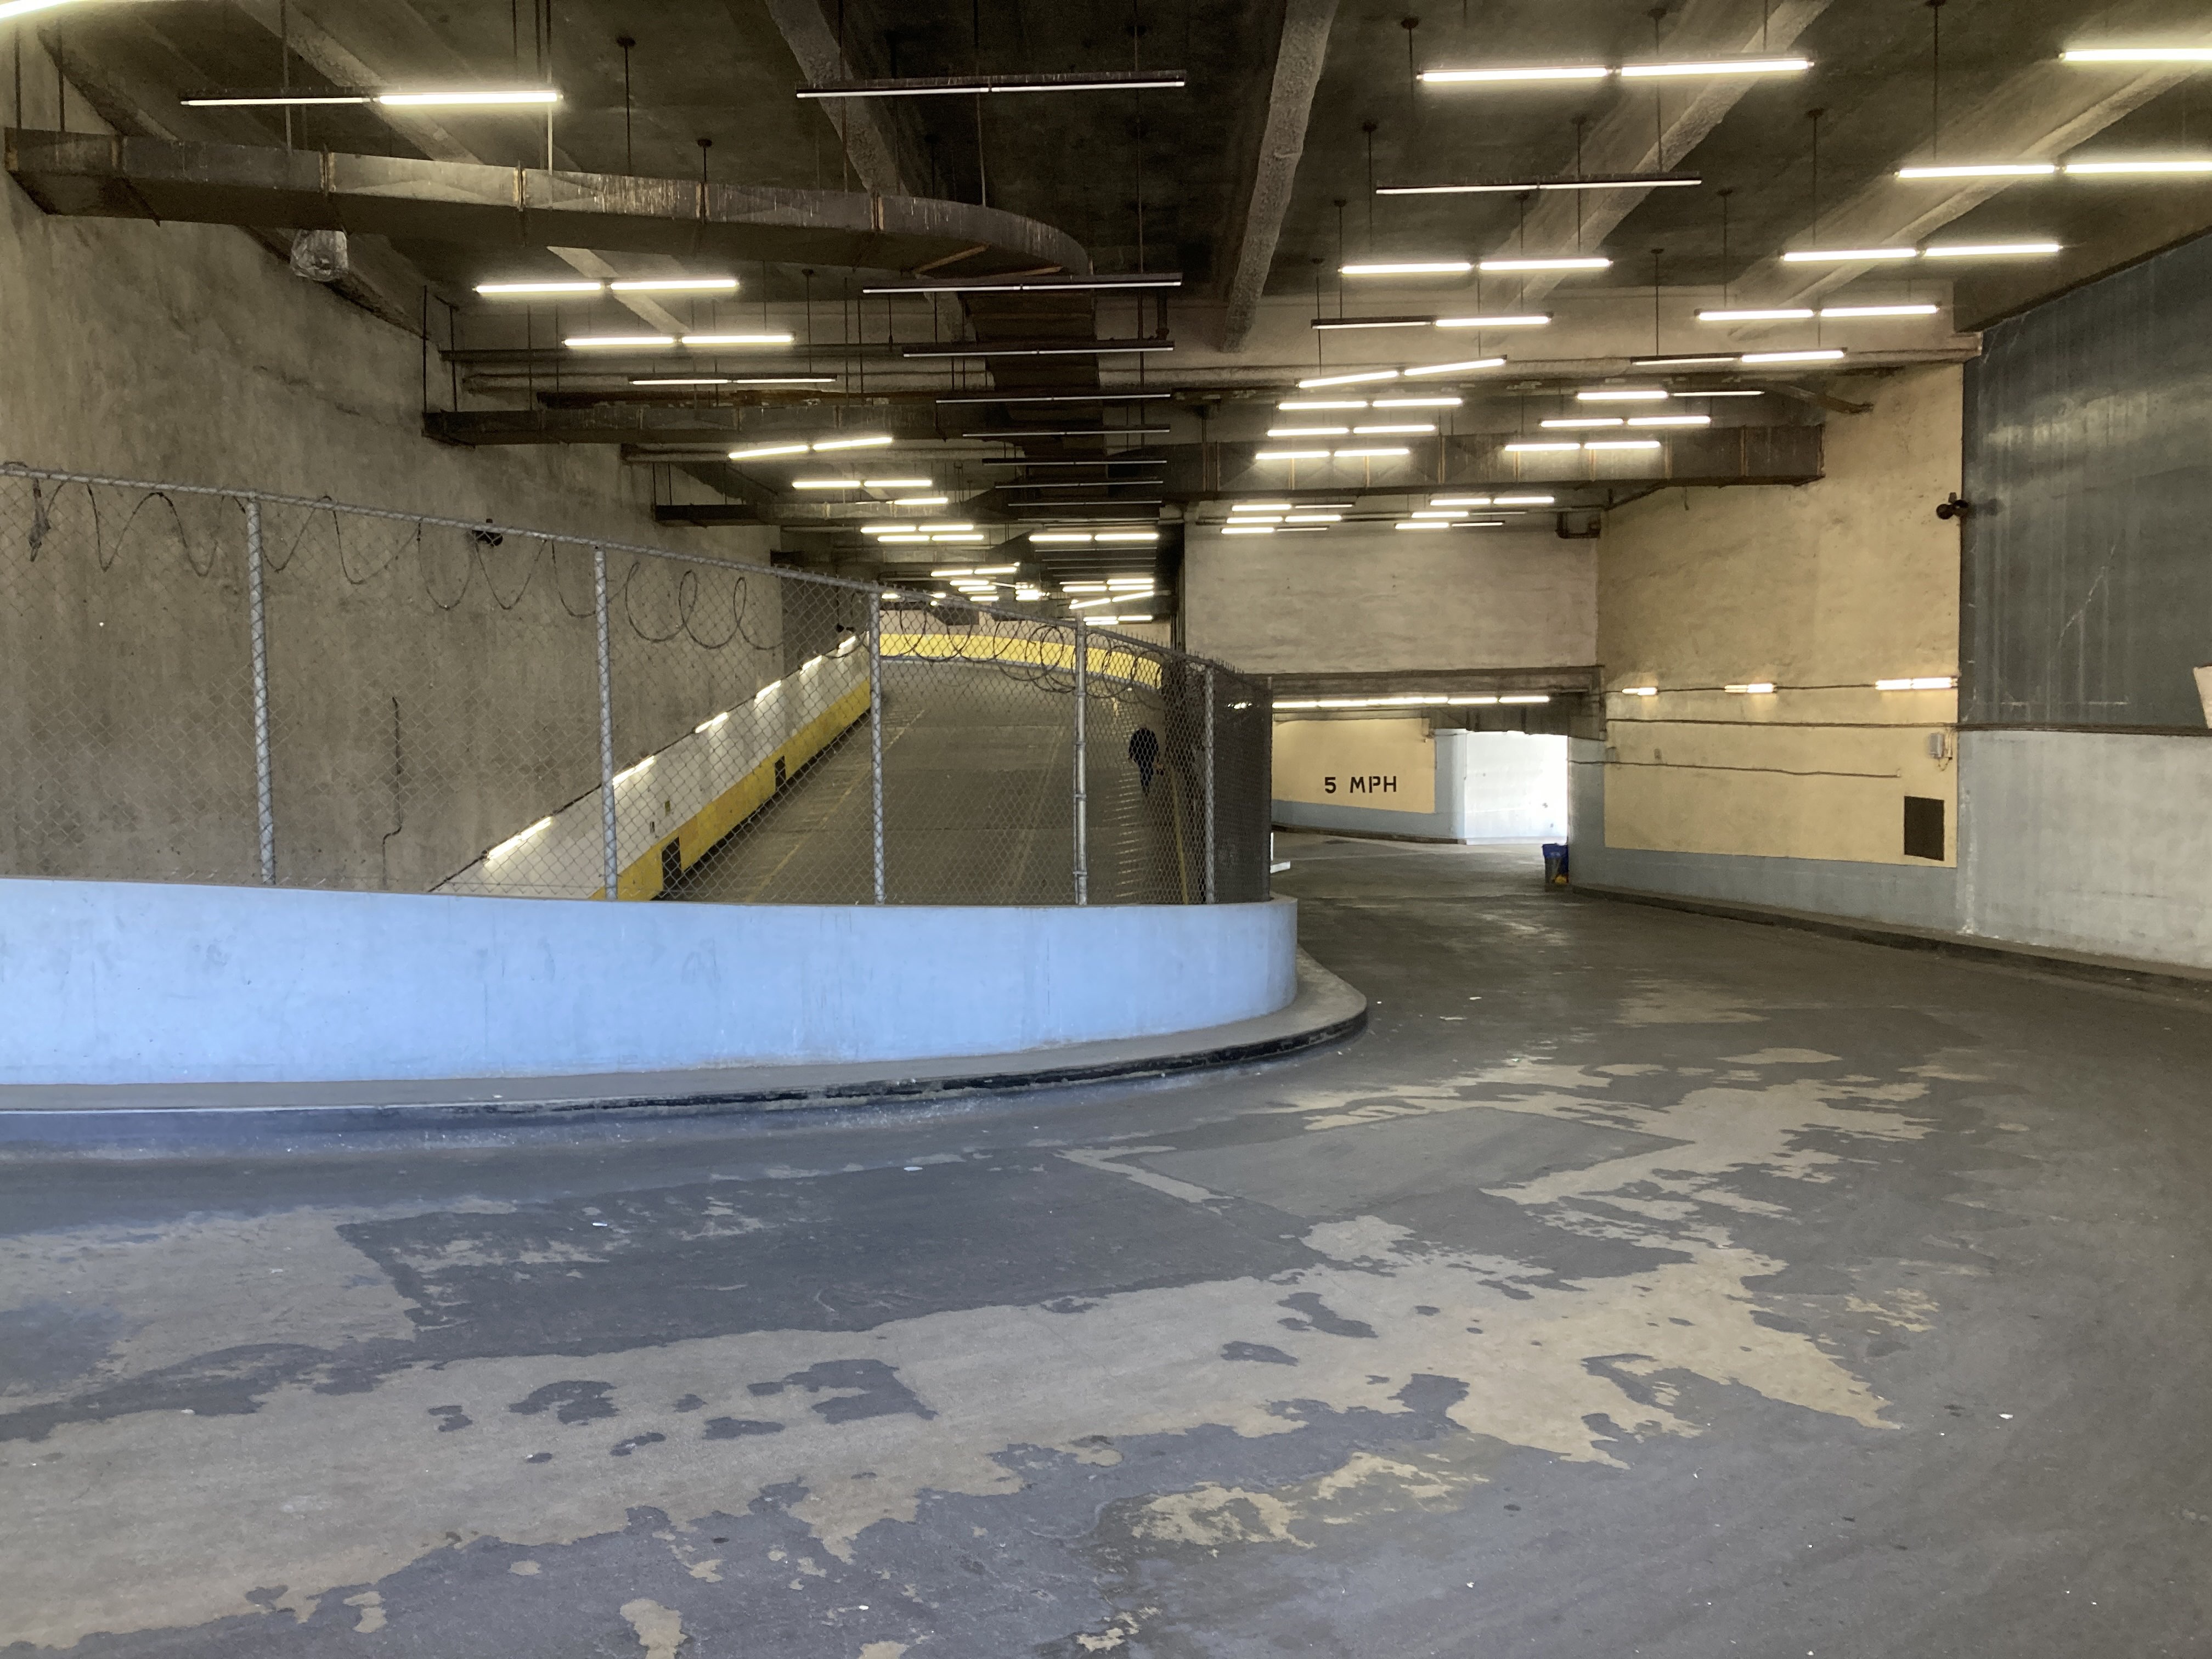 Interior open space with three vehicle ramps. one ramp goes from los angeles street up to the rooftop. it is separated by a chain length fence from two ramps that form a loop from seventh street to the second floor.